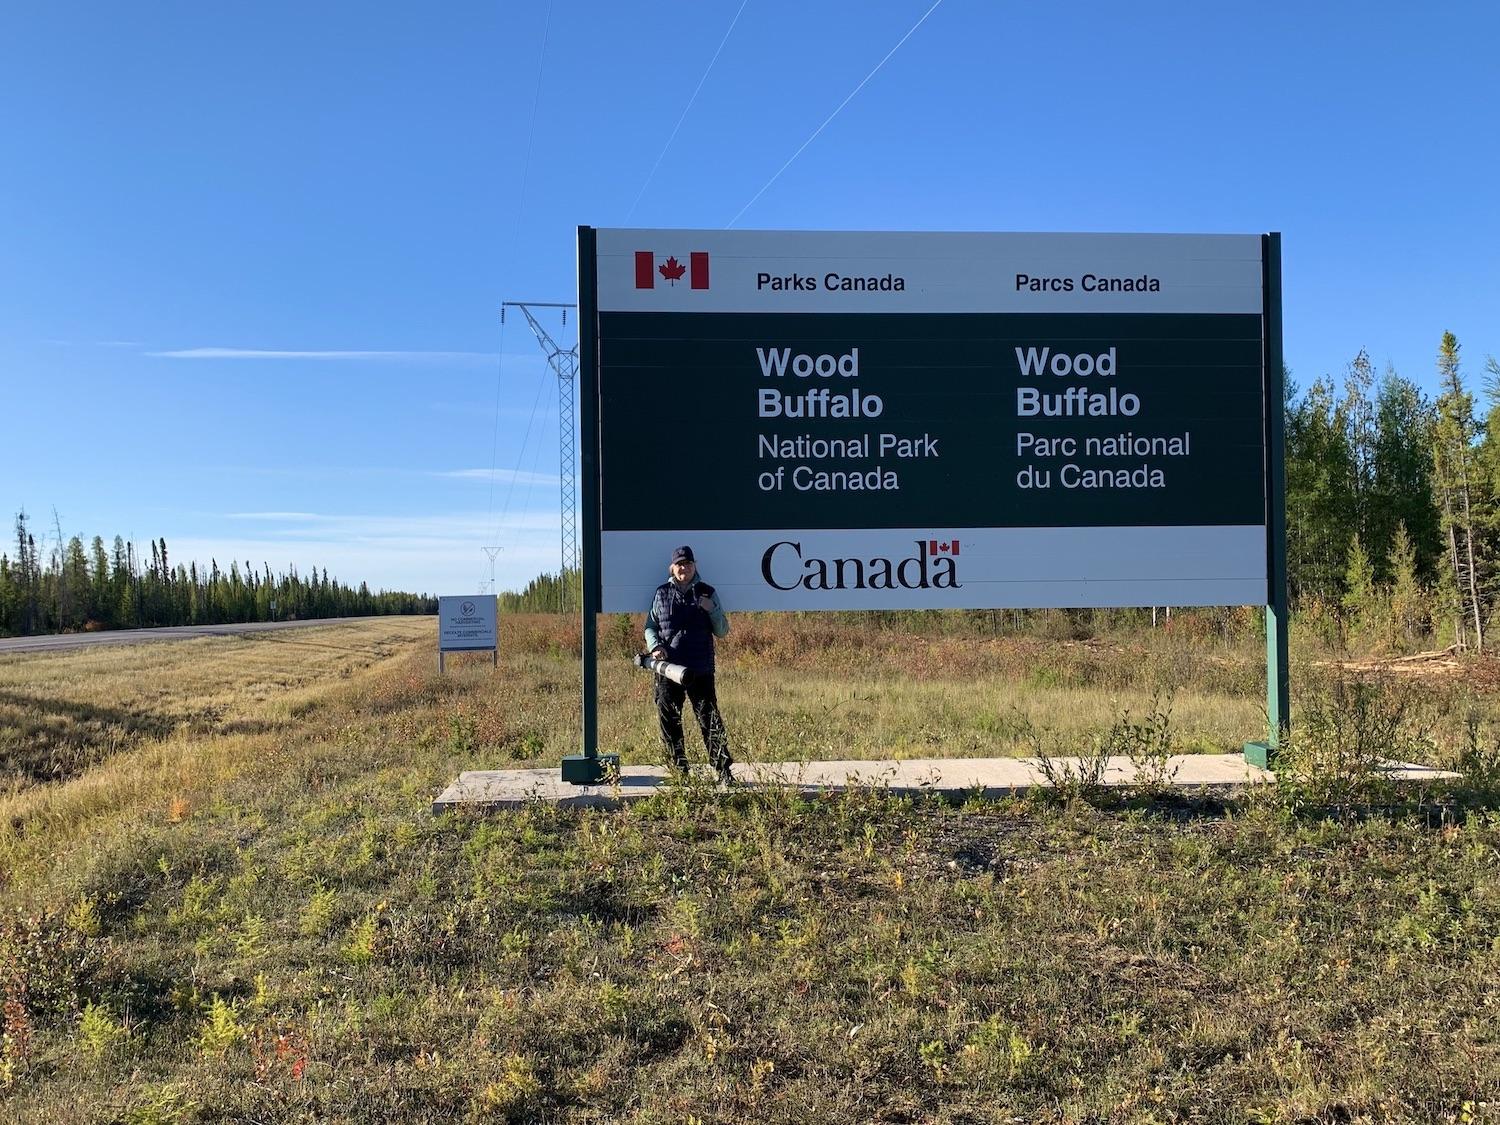 Writer Carol Patterson made the long drive north to see if Wood Buffalo National Park was worth the effort. It was, she concluded.